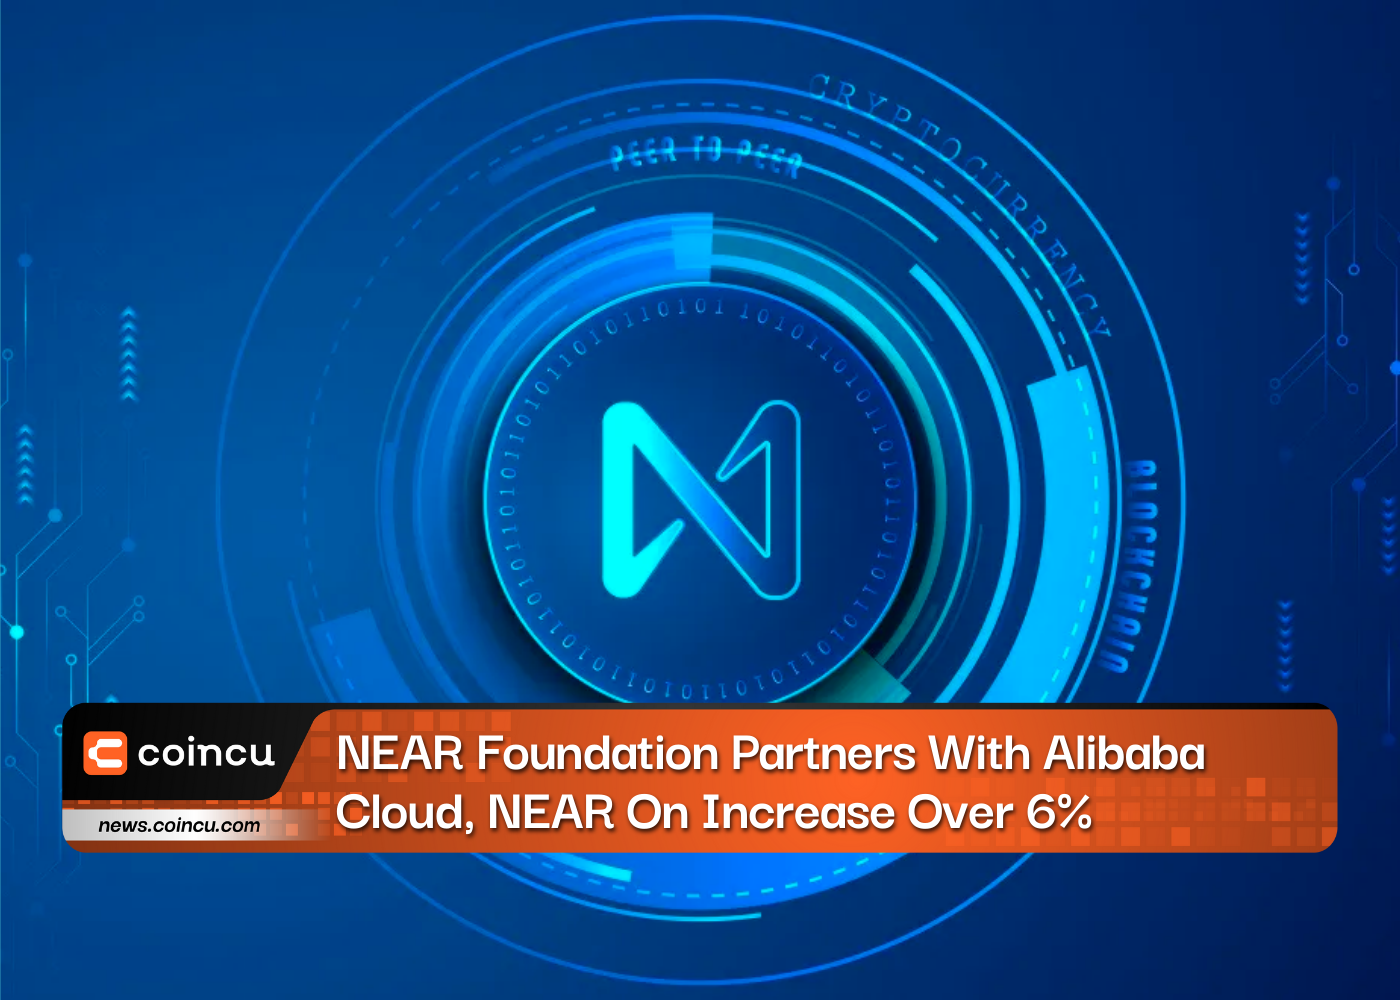 NEAR Foundation Partners With Alibaba Cloud, NEAR Increases Over 15%